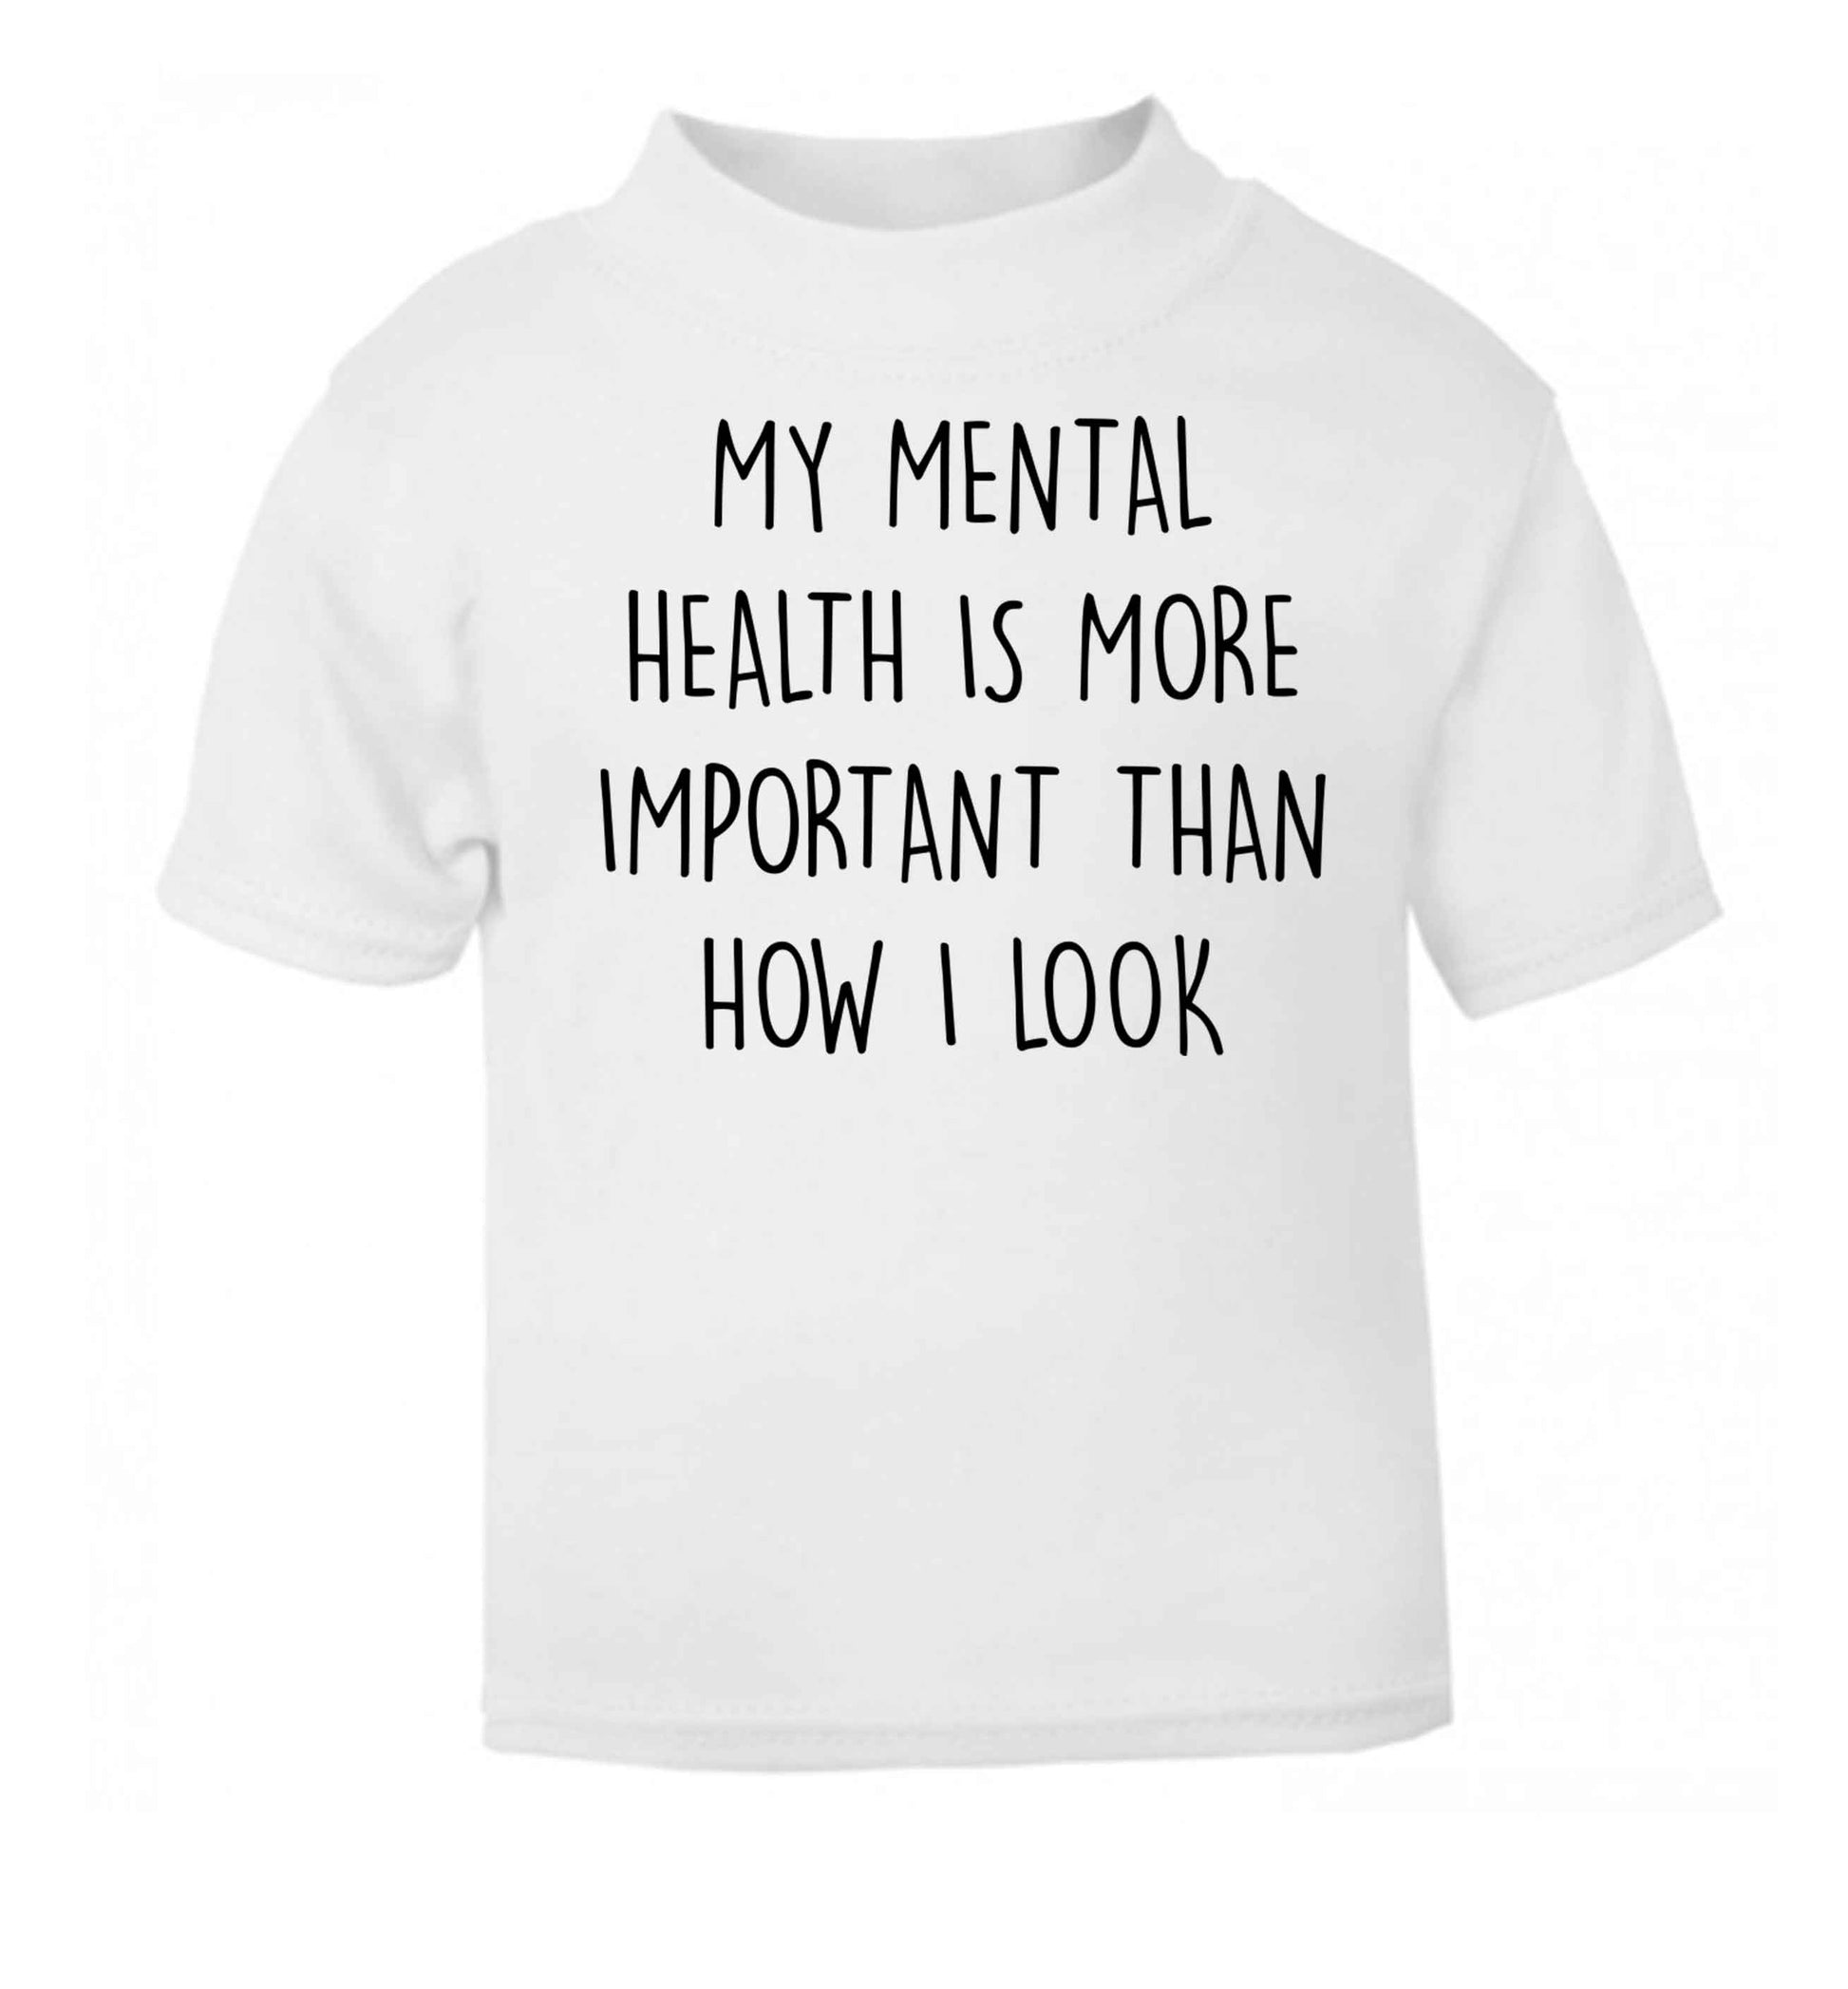 My mental health is more importnat than how I look white baby toddler Tshirt 2 Years